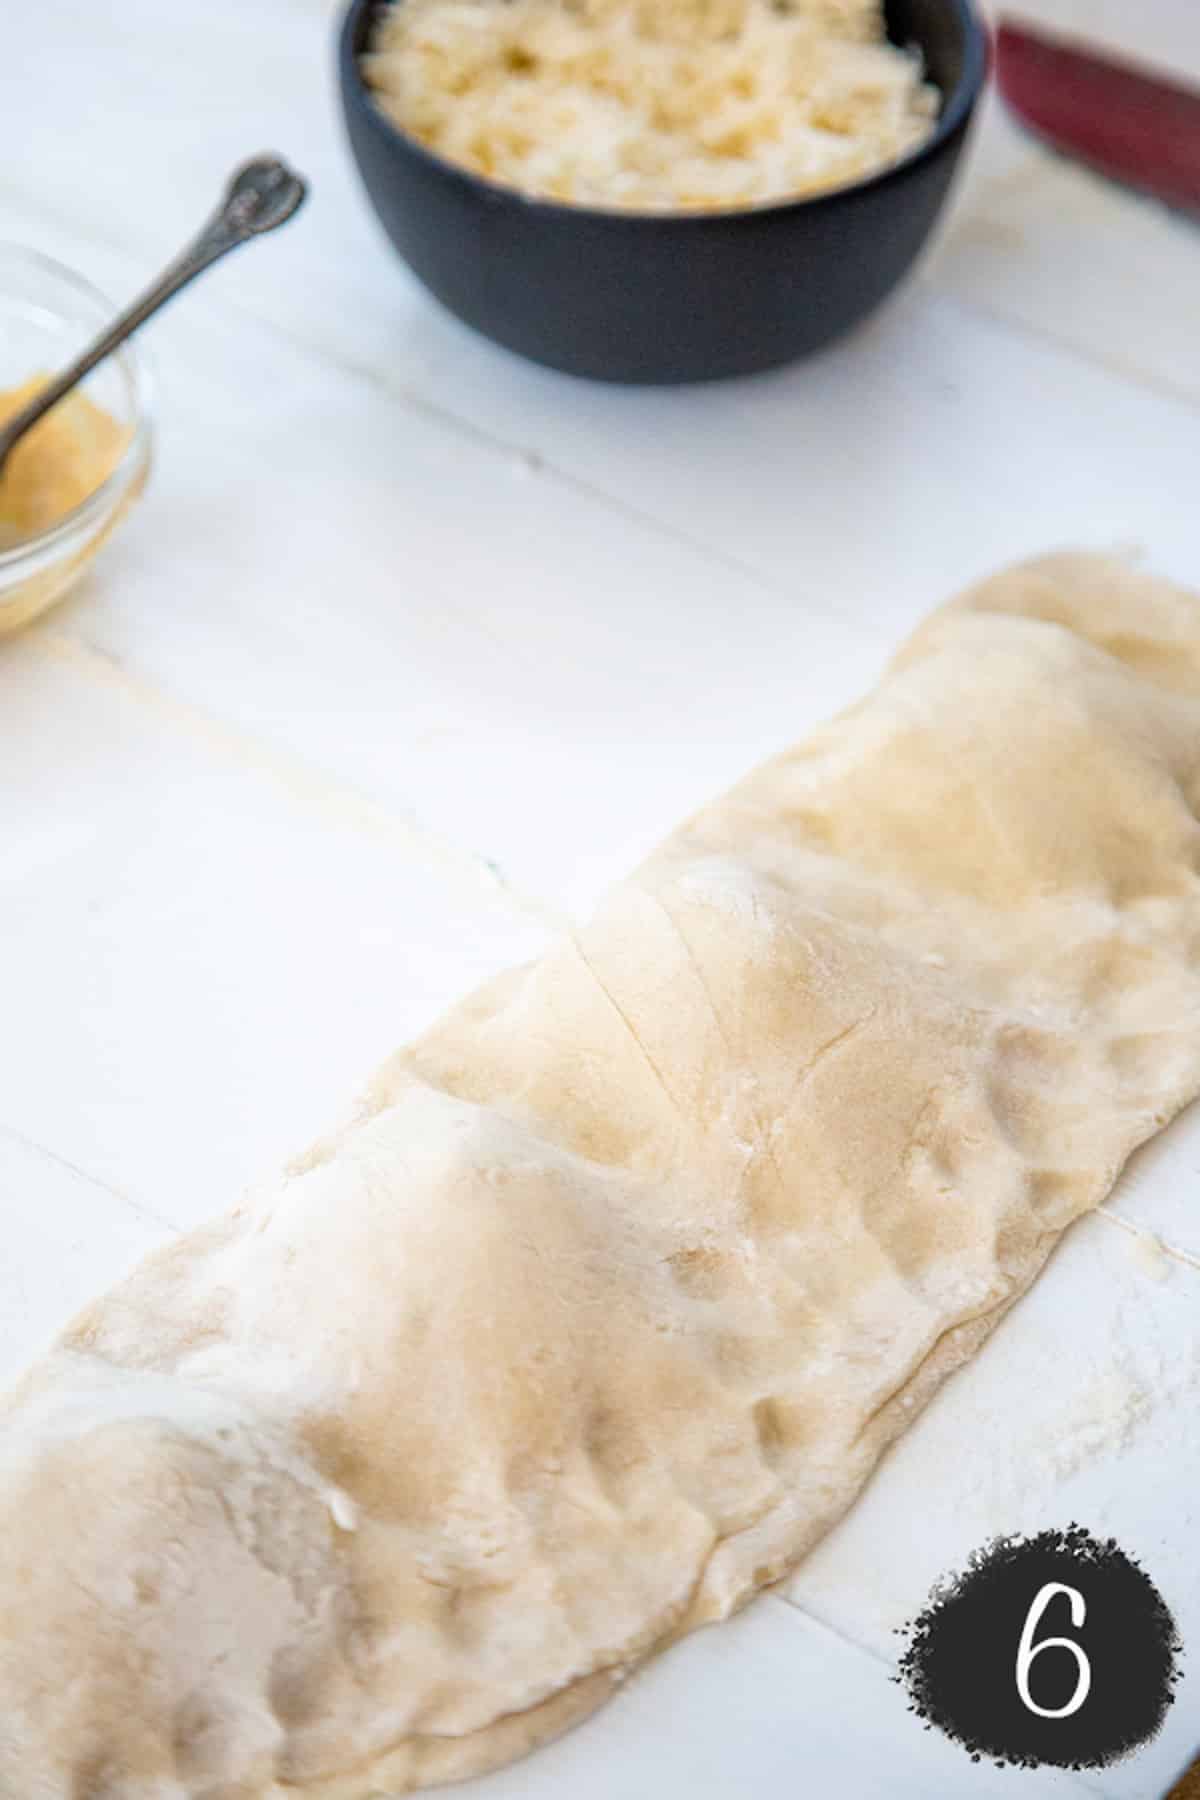 Pizza dough folded over vegan calzone filling with pinched edges to keep the filling in the dough.